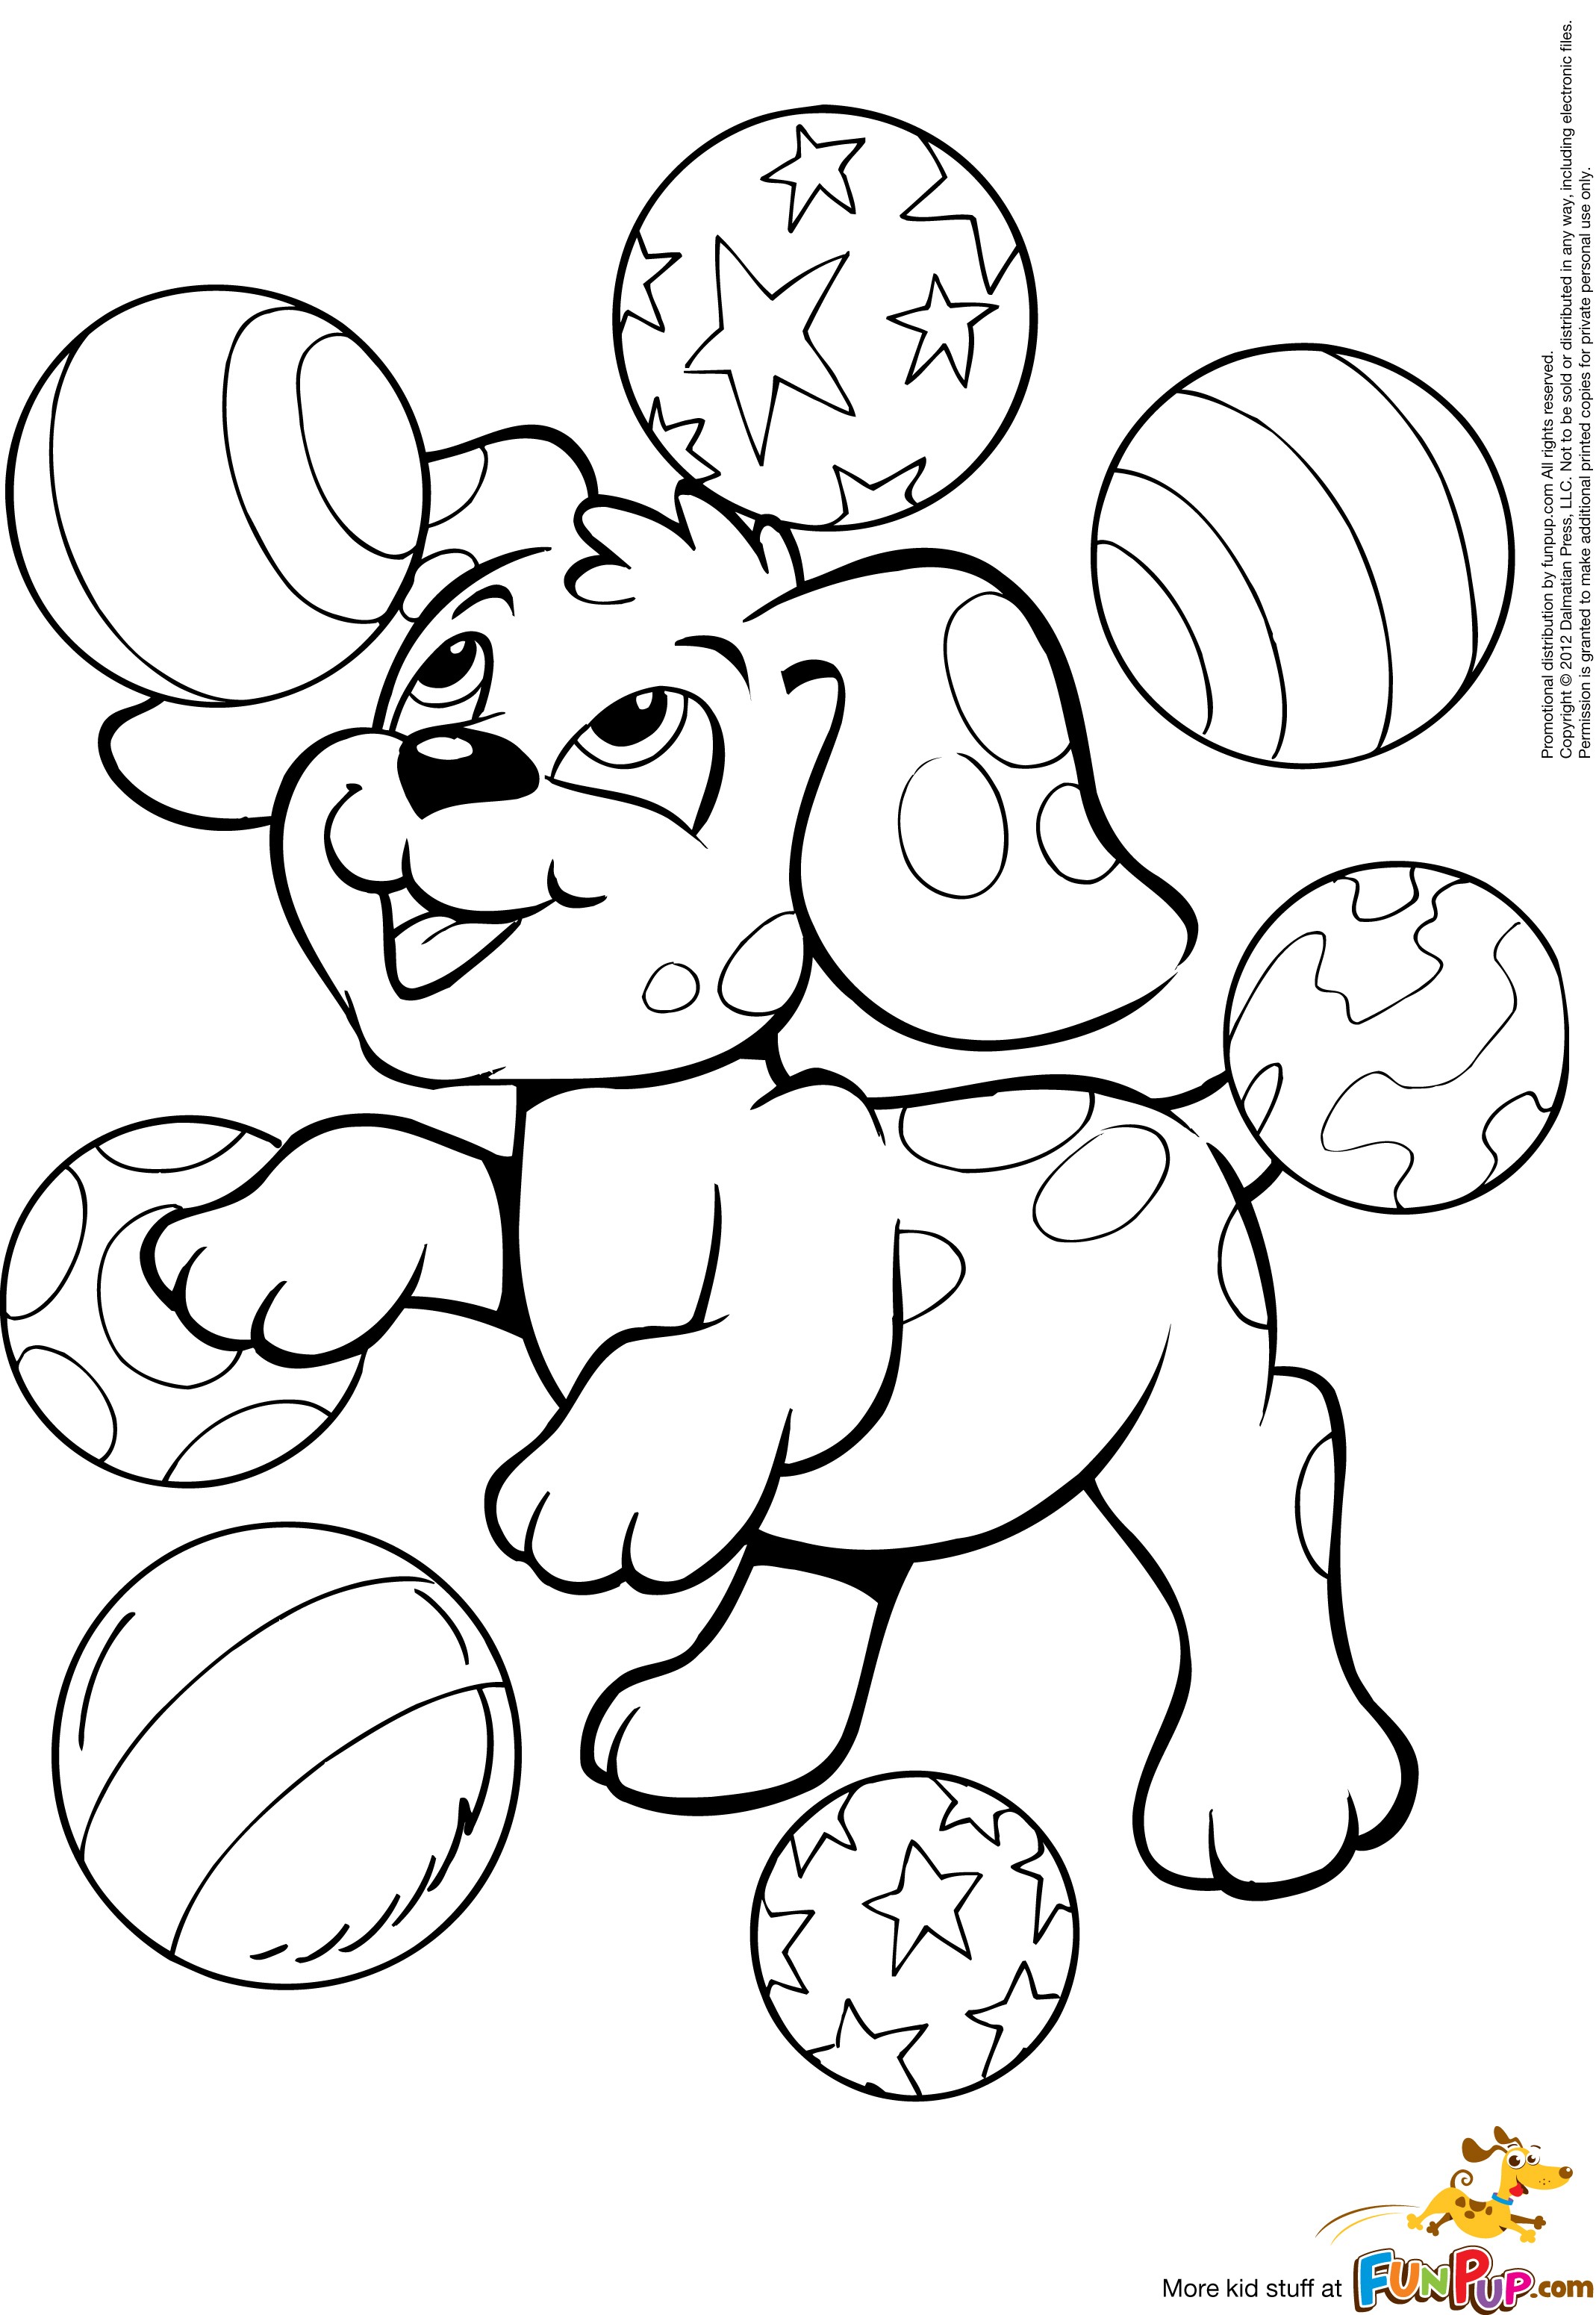 Printable Cute Puppy Coloring Pages at GetDrawings | Free download